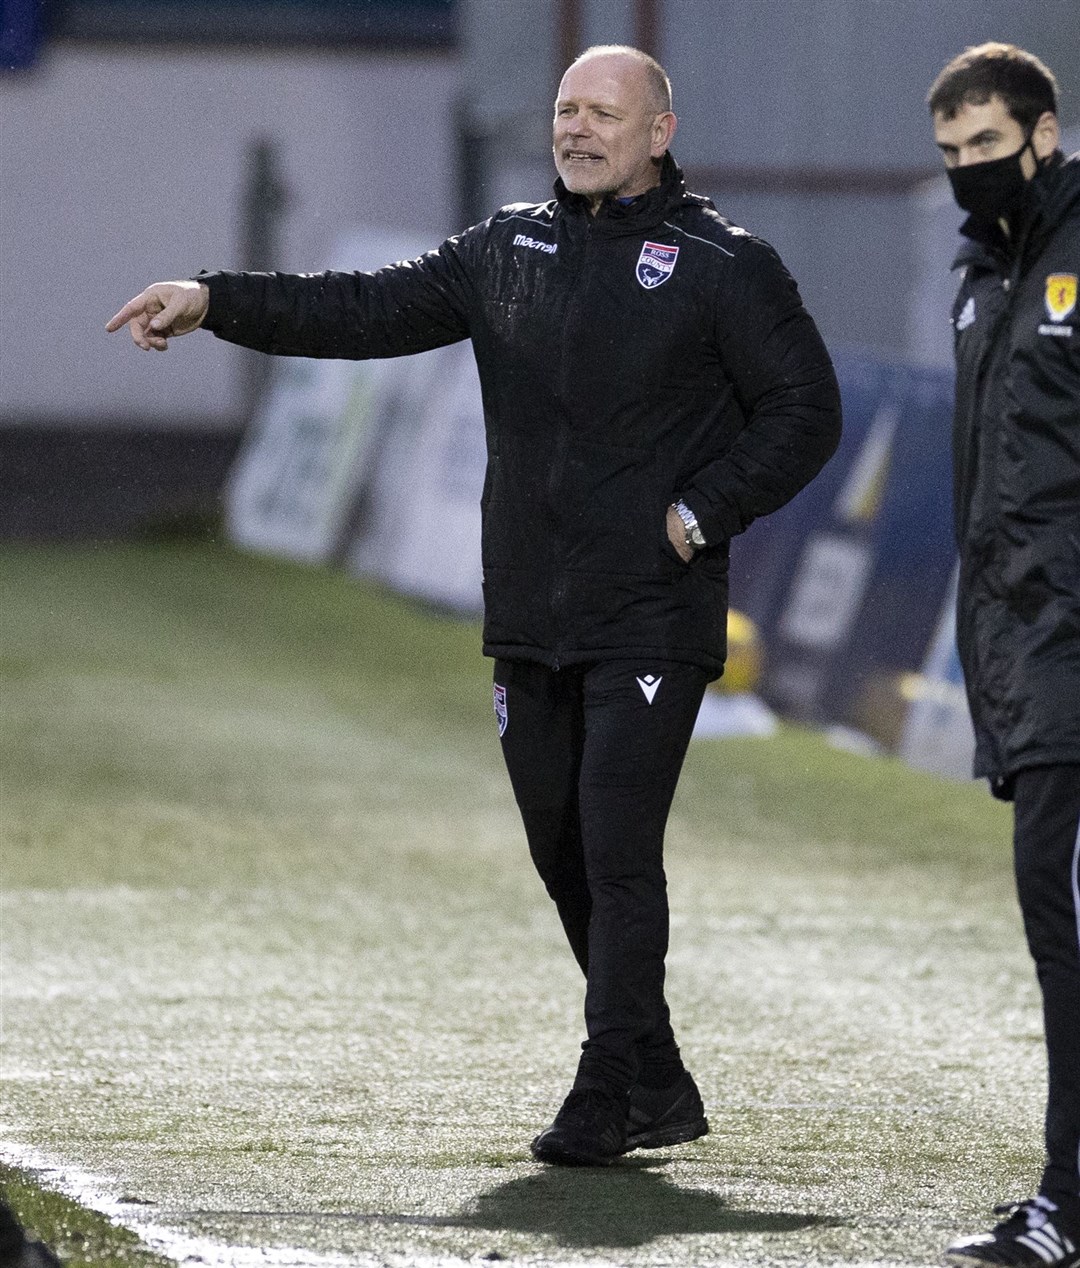 Picture - Ken Macpherson, Inverness. Ross County(0) v St.Mirren(2). 26.12.20. Ross County manager John Hughes.